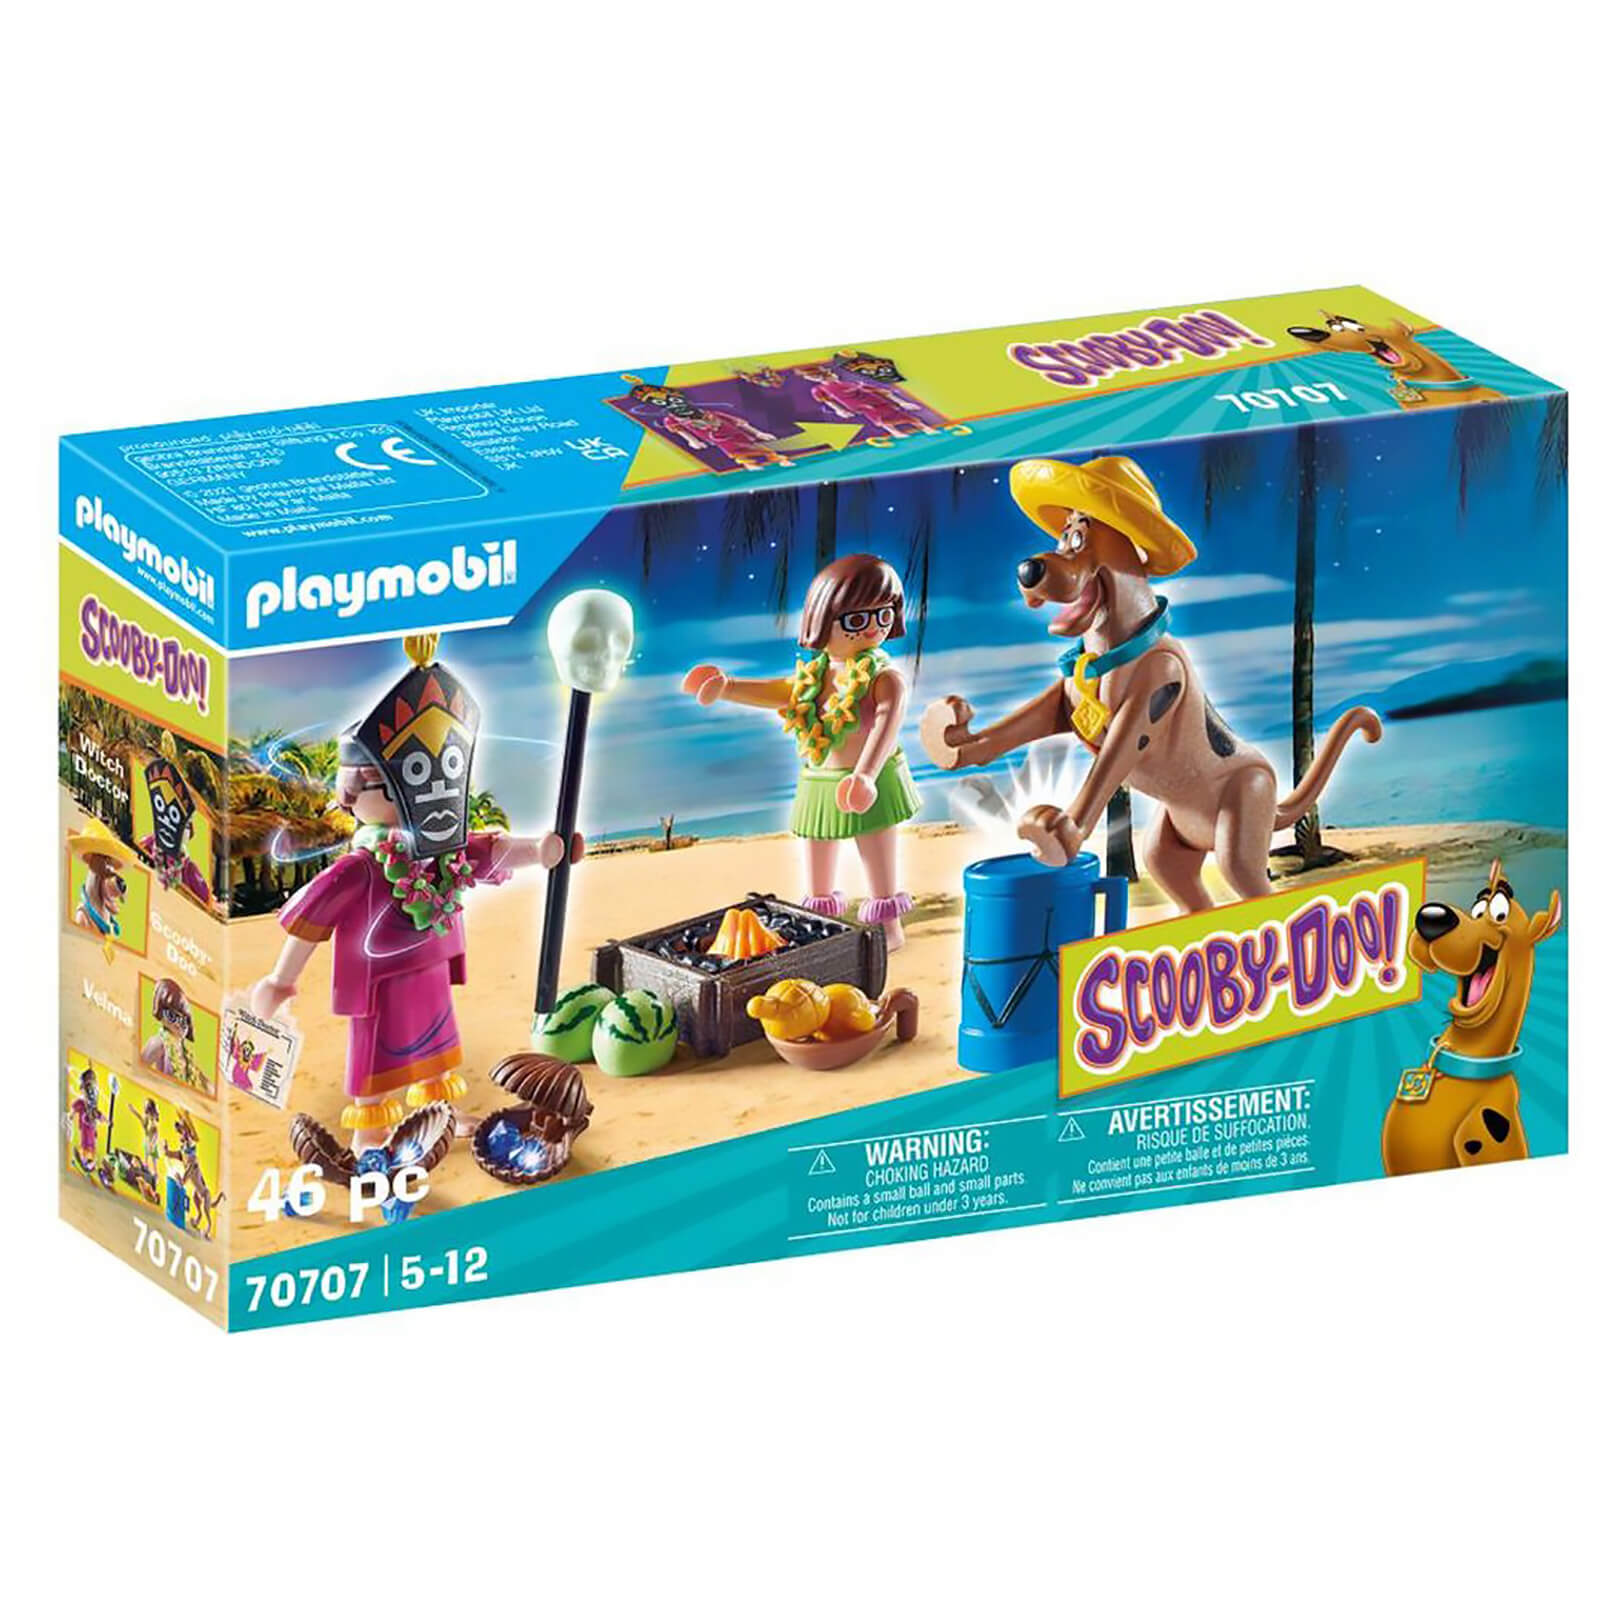 Playmobil SCOOBY-DOO! Adventure with Witch Doctor (70707)